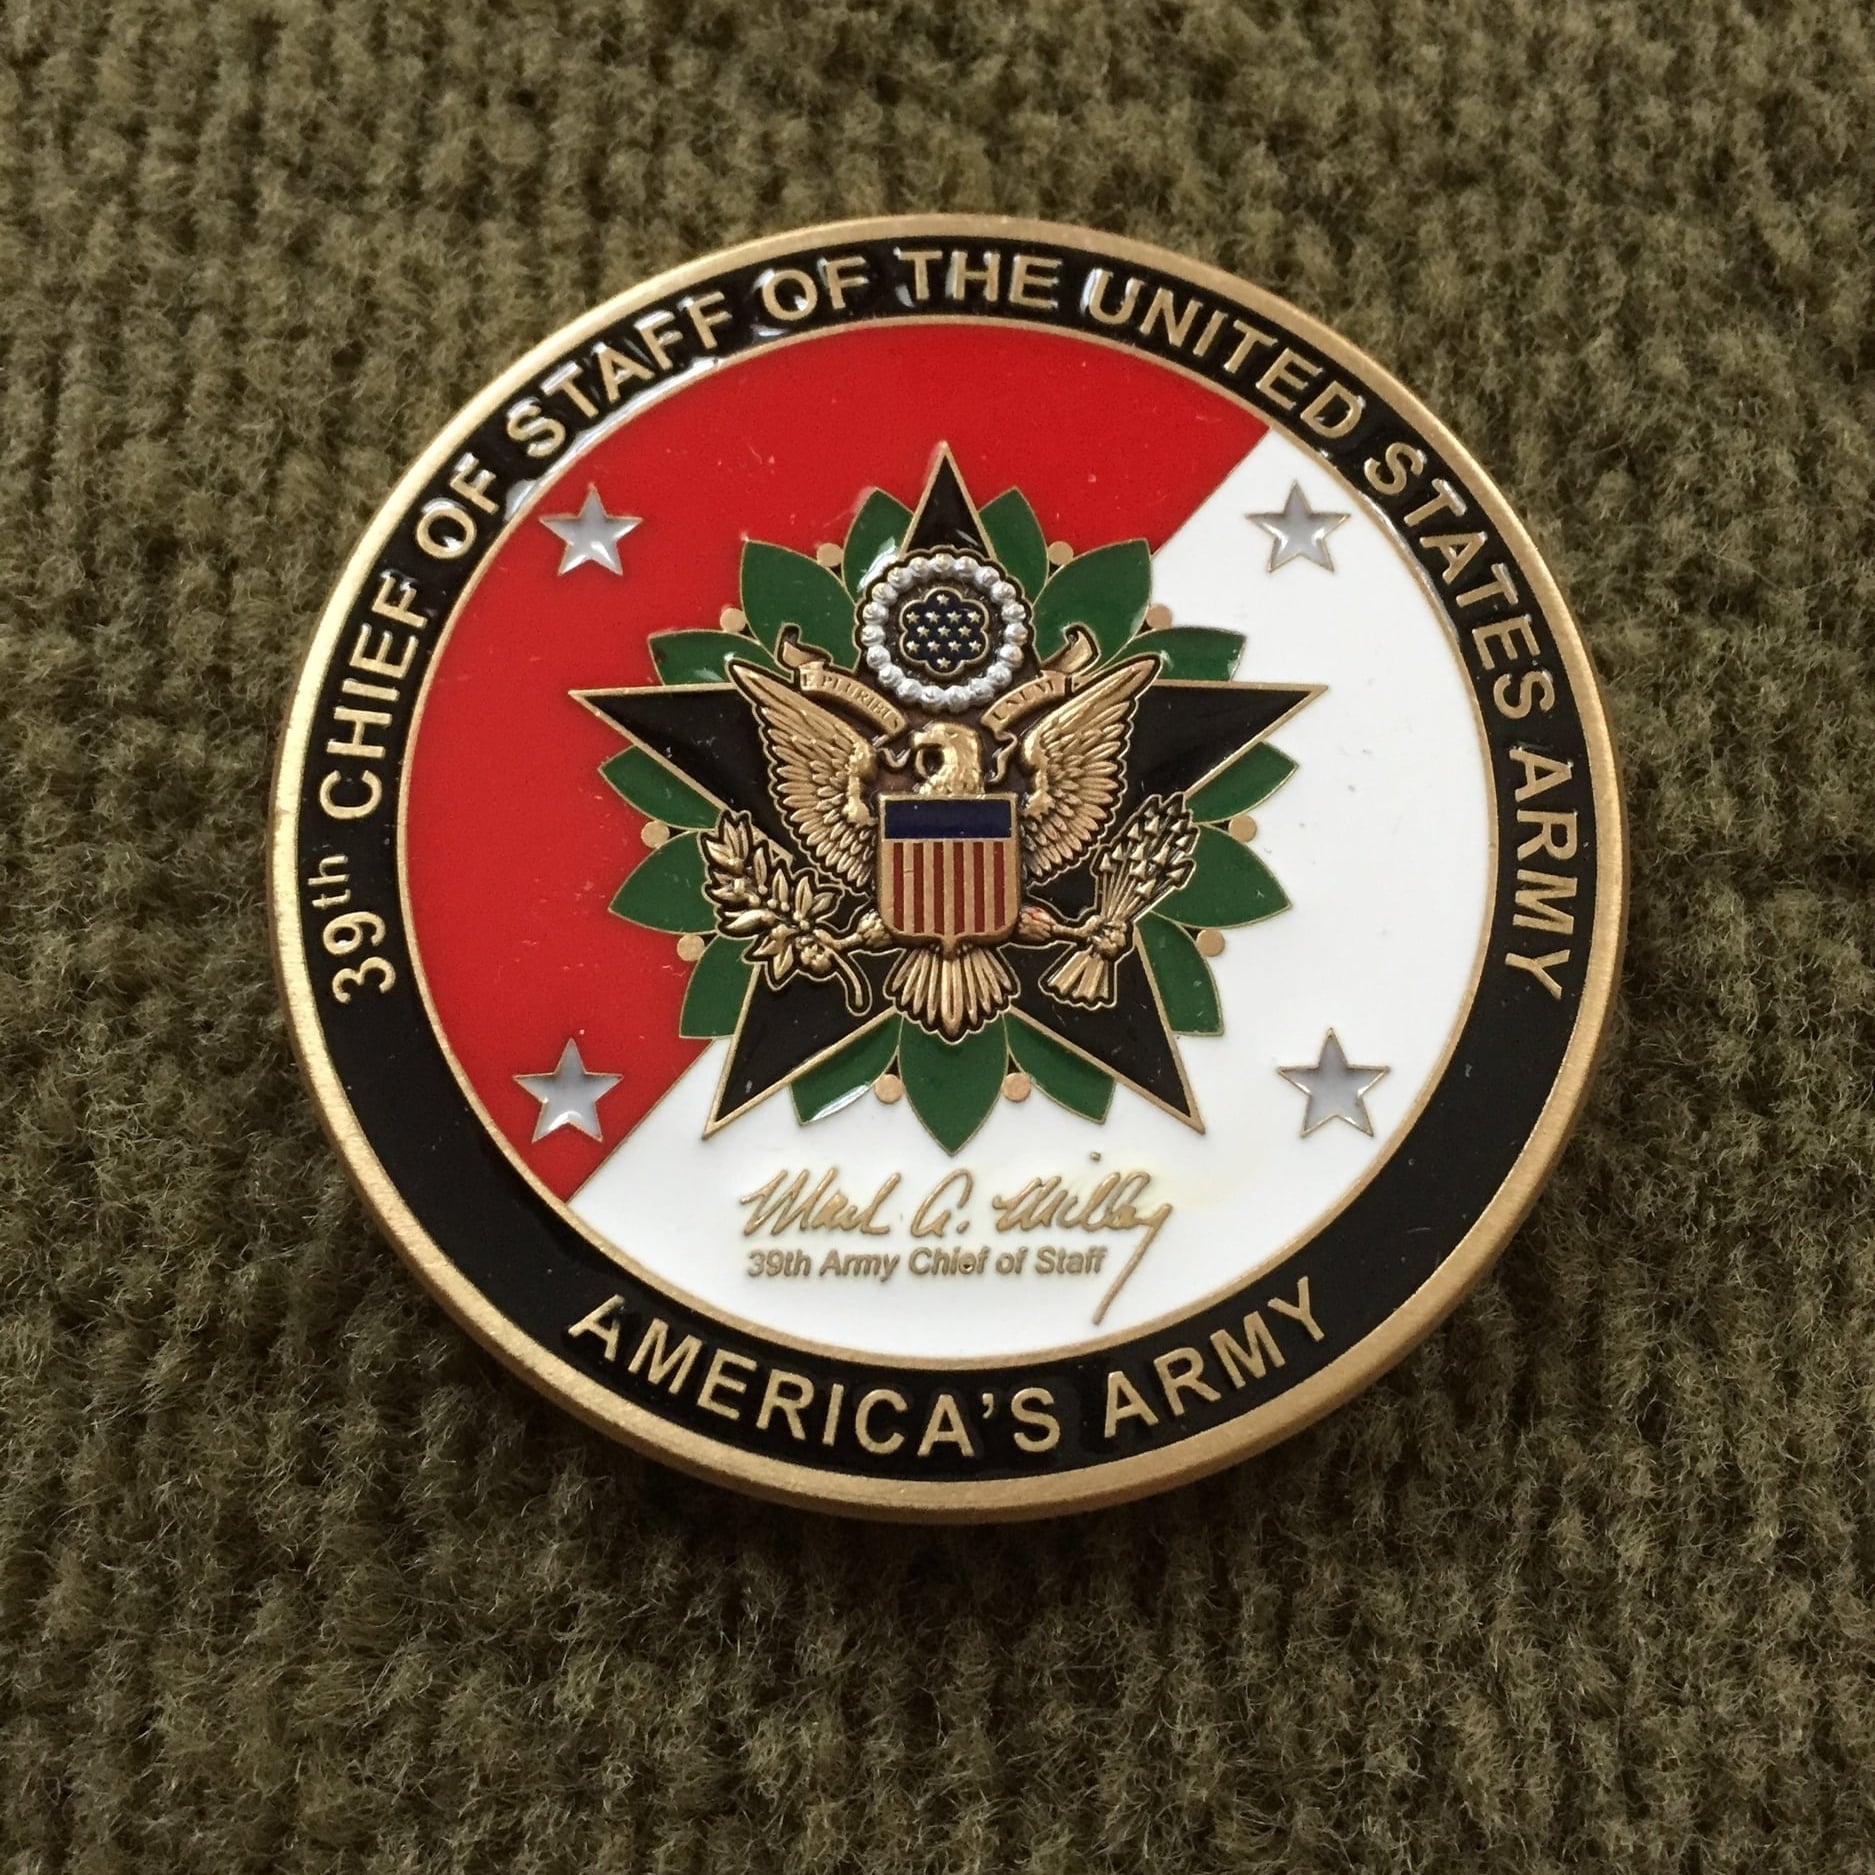 US ARMY COIN 9TH VICE CHAIRMAN JOINT CHIEFS OF STAFF ADMIRAL JAMES WINNEFELD JR